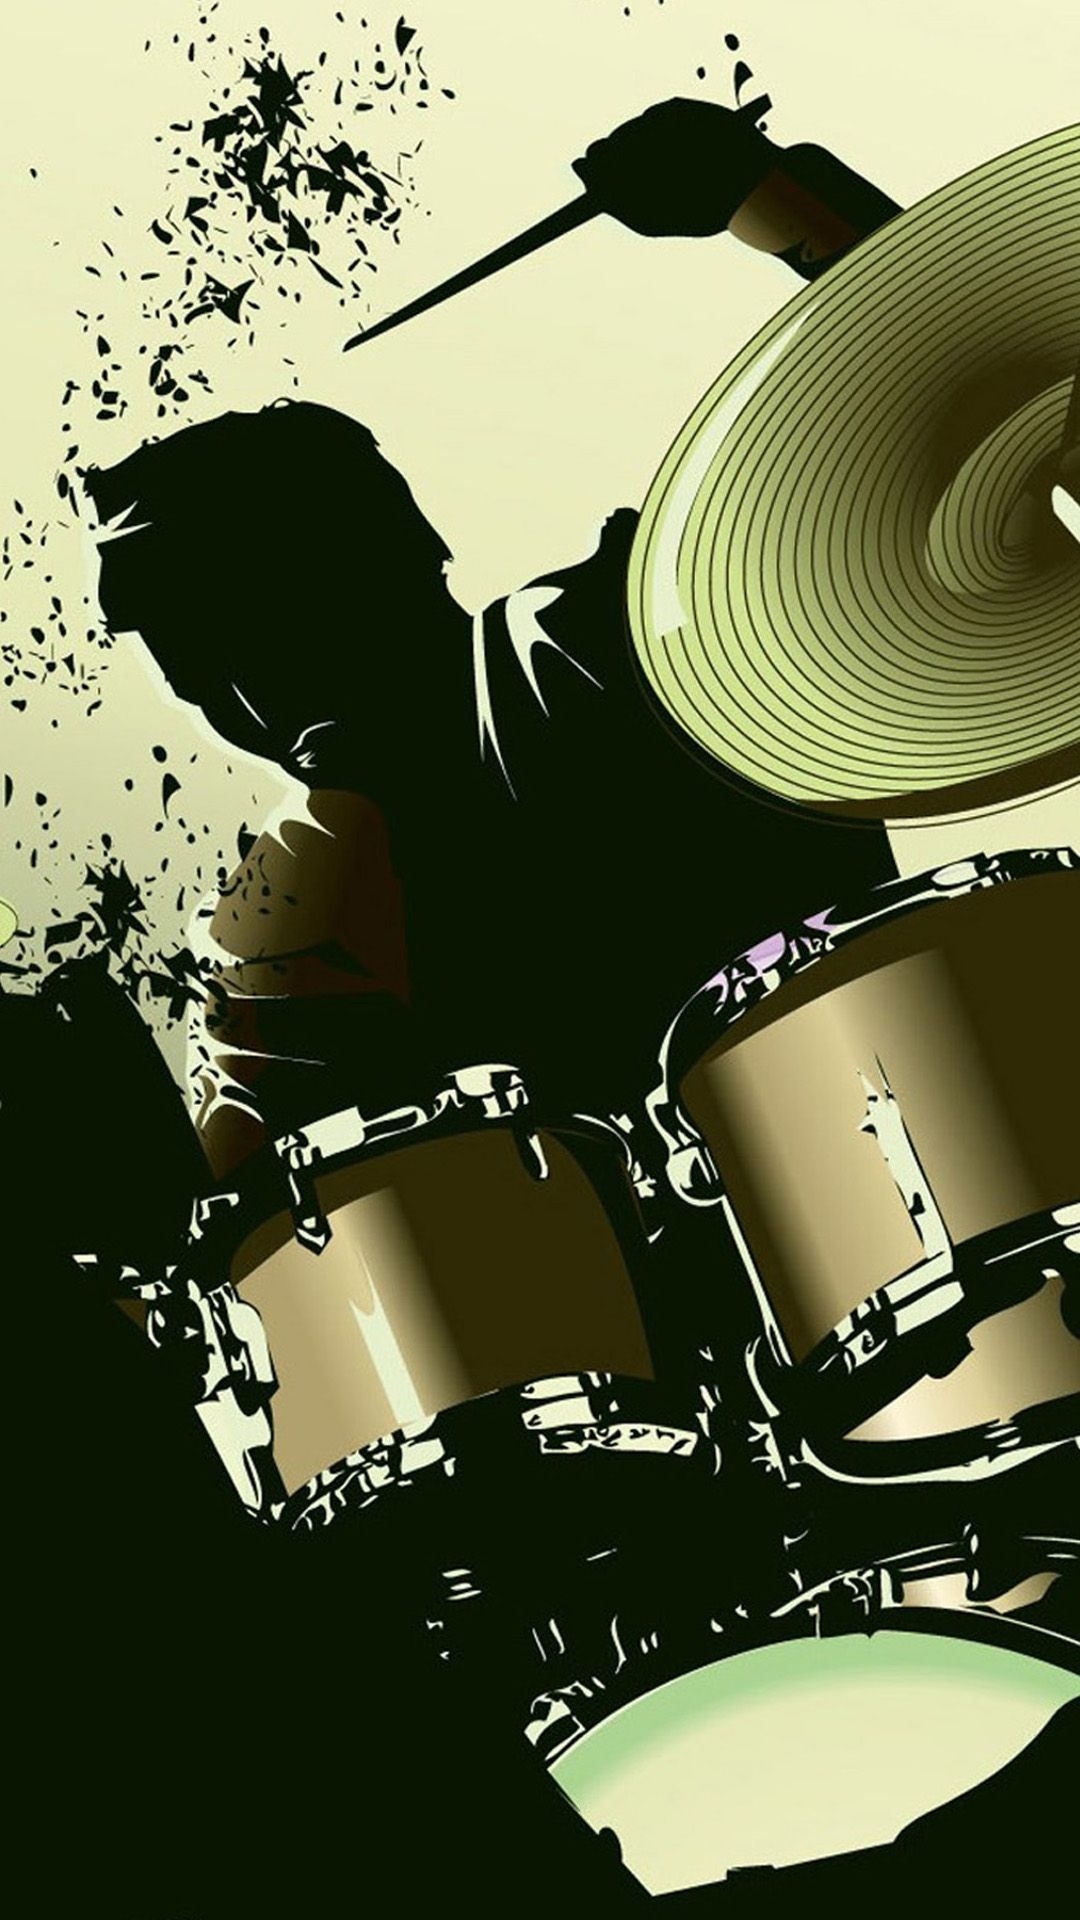 Drums: Drummer And Drum Set In The Modern Art, Music Artist, Drawing, Musical Rhythmic Intention. 1080x1920 Full HD Wallpaper.